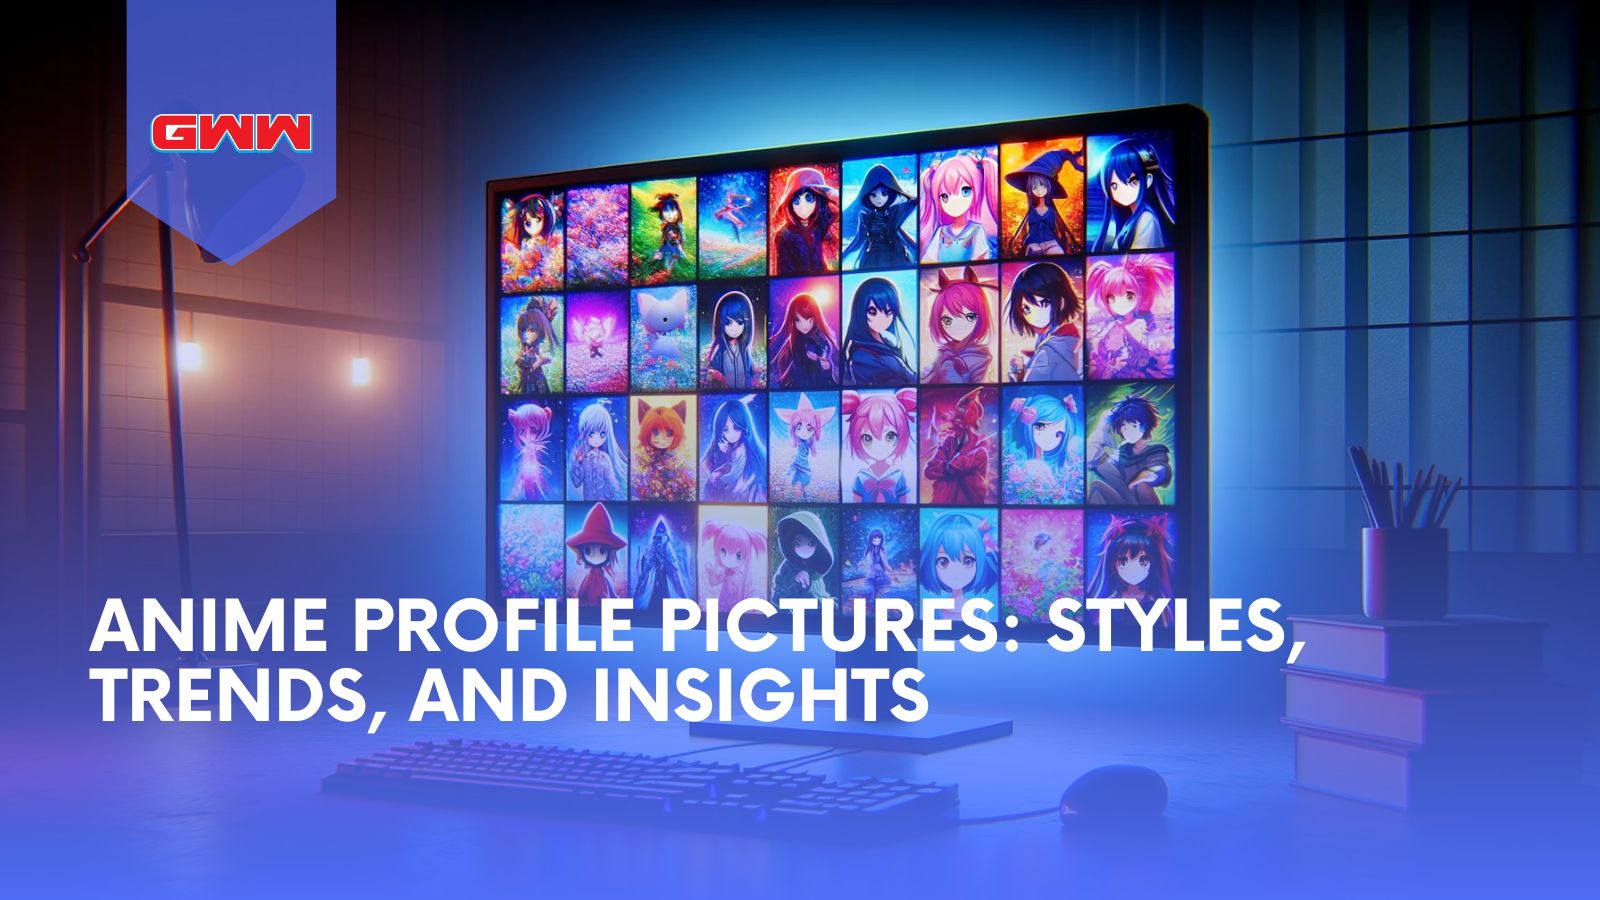 Anime Profile Pictures: Styles, Trends, and Insights